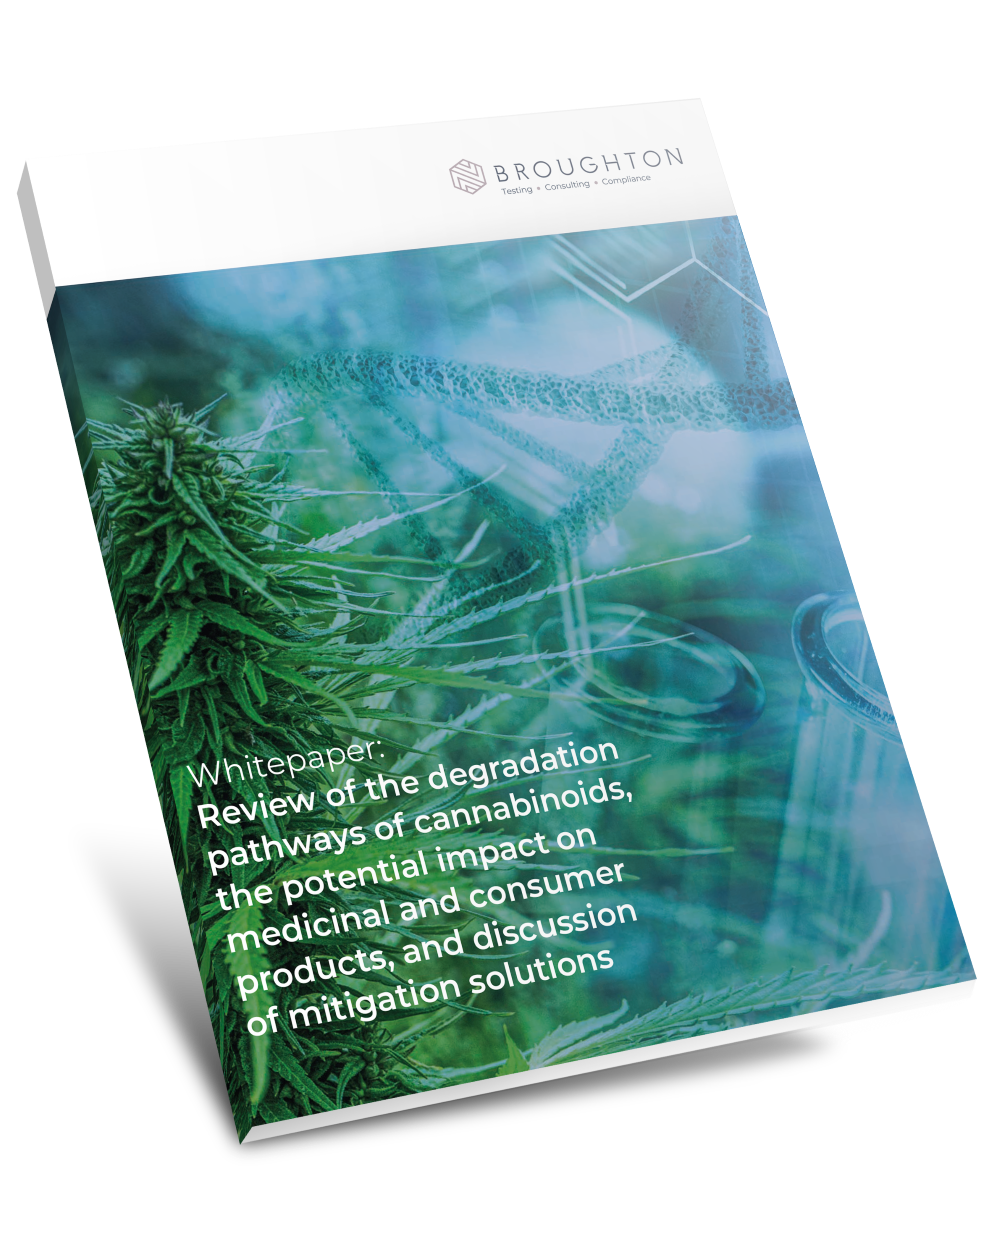 Whitepaper:-Review-of-the-degradation-pathways-of-cannabinoids,-the-potential-impact-on-medicinal-and-consumer-products,-and-discussion-of-mitigation-solutions-